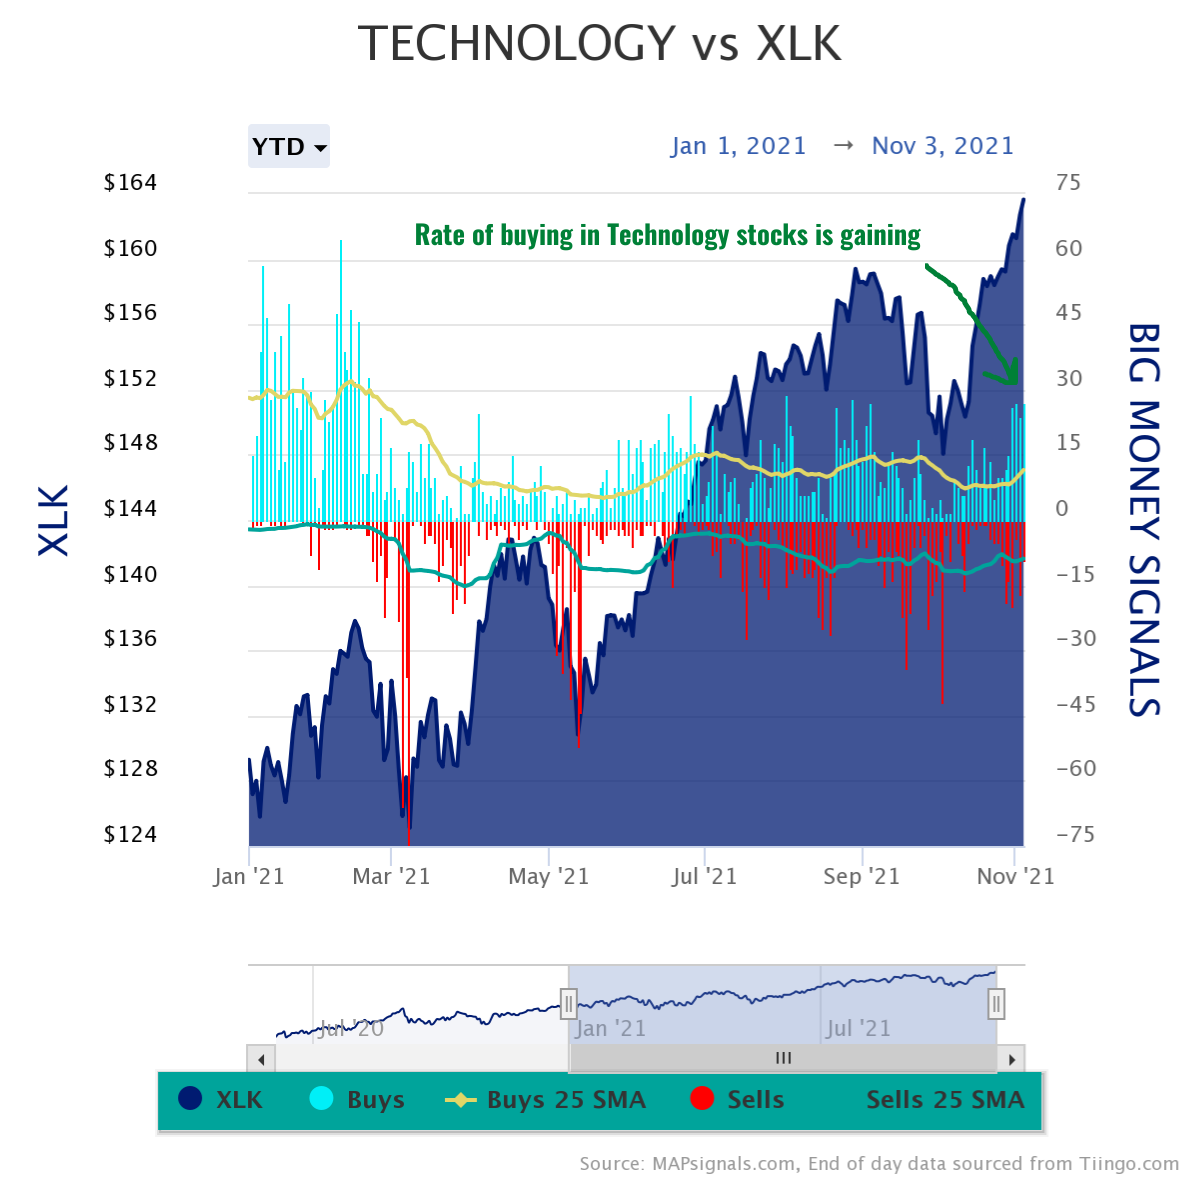 Rate of buying in Technology stocks is gaining